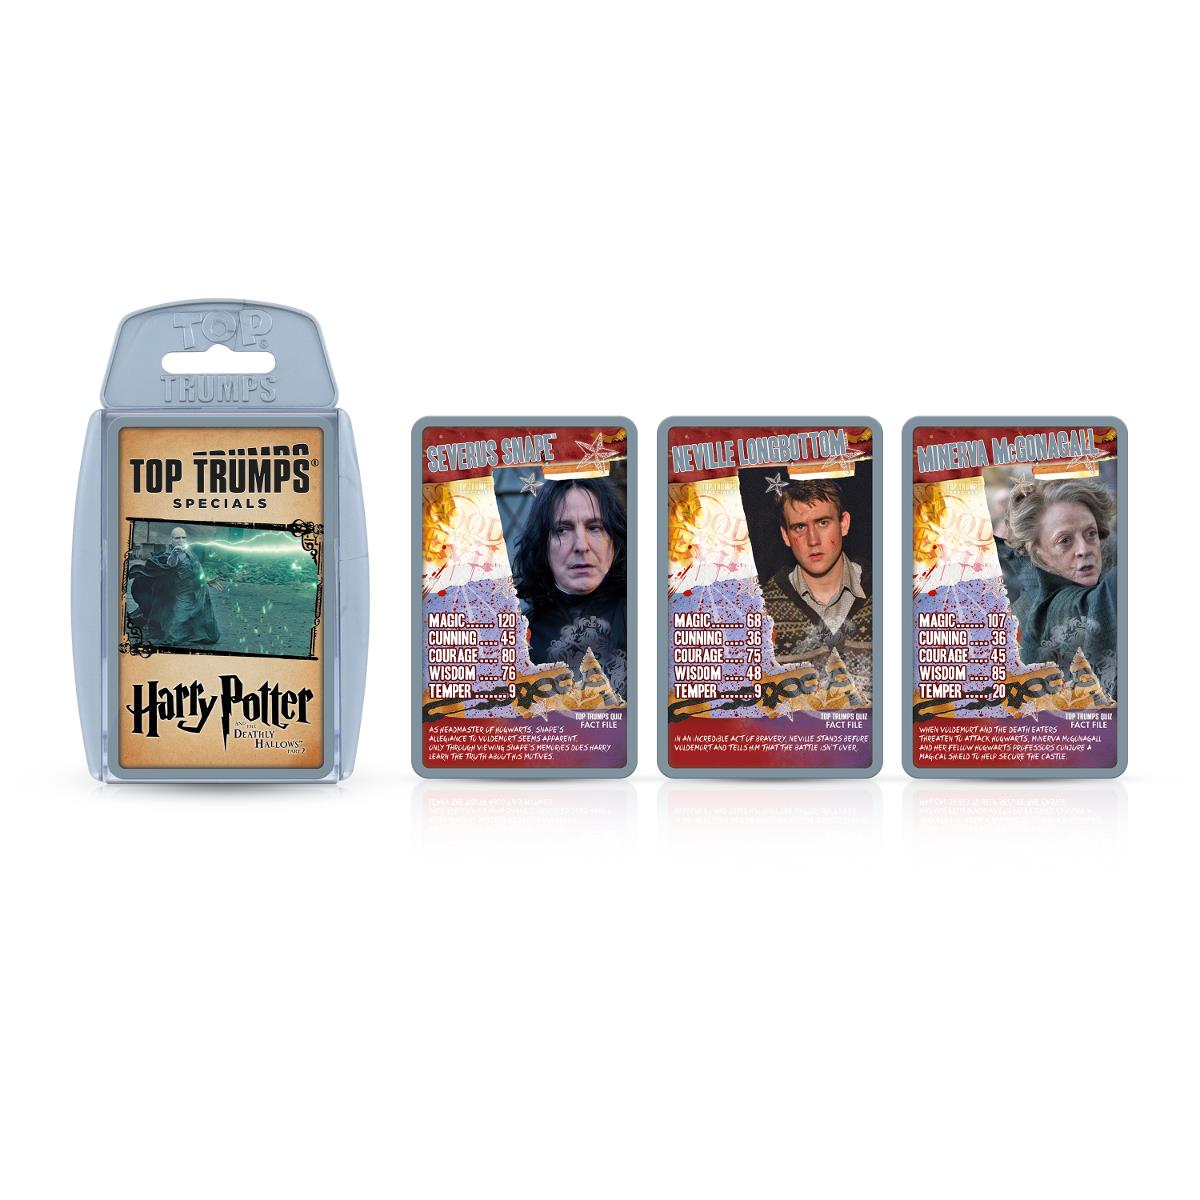 Harry Potter & The Deathly Hallows Part 2 Top Trumps Card Game